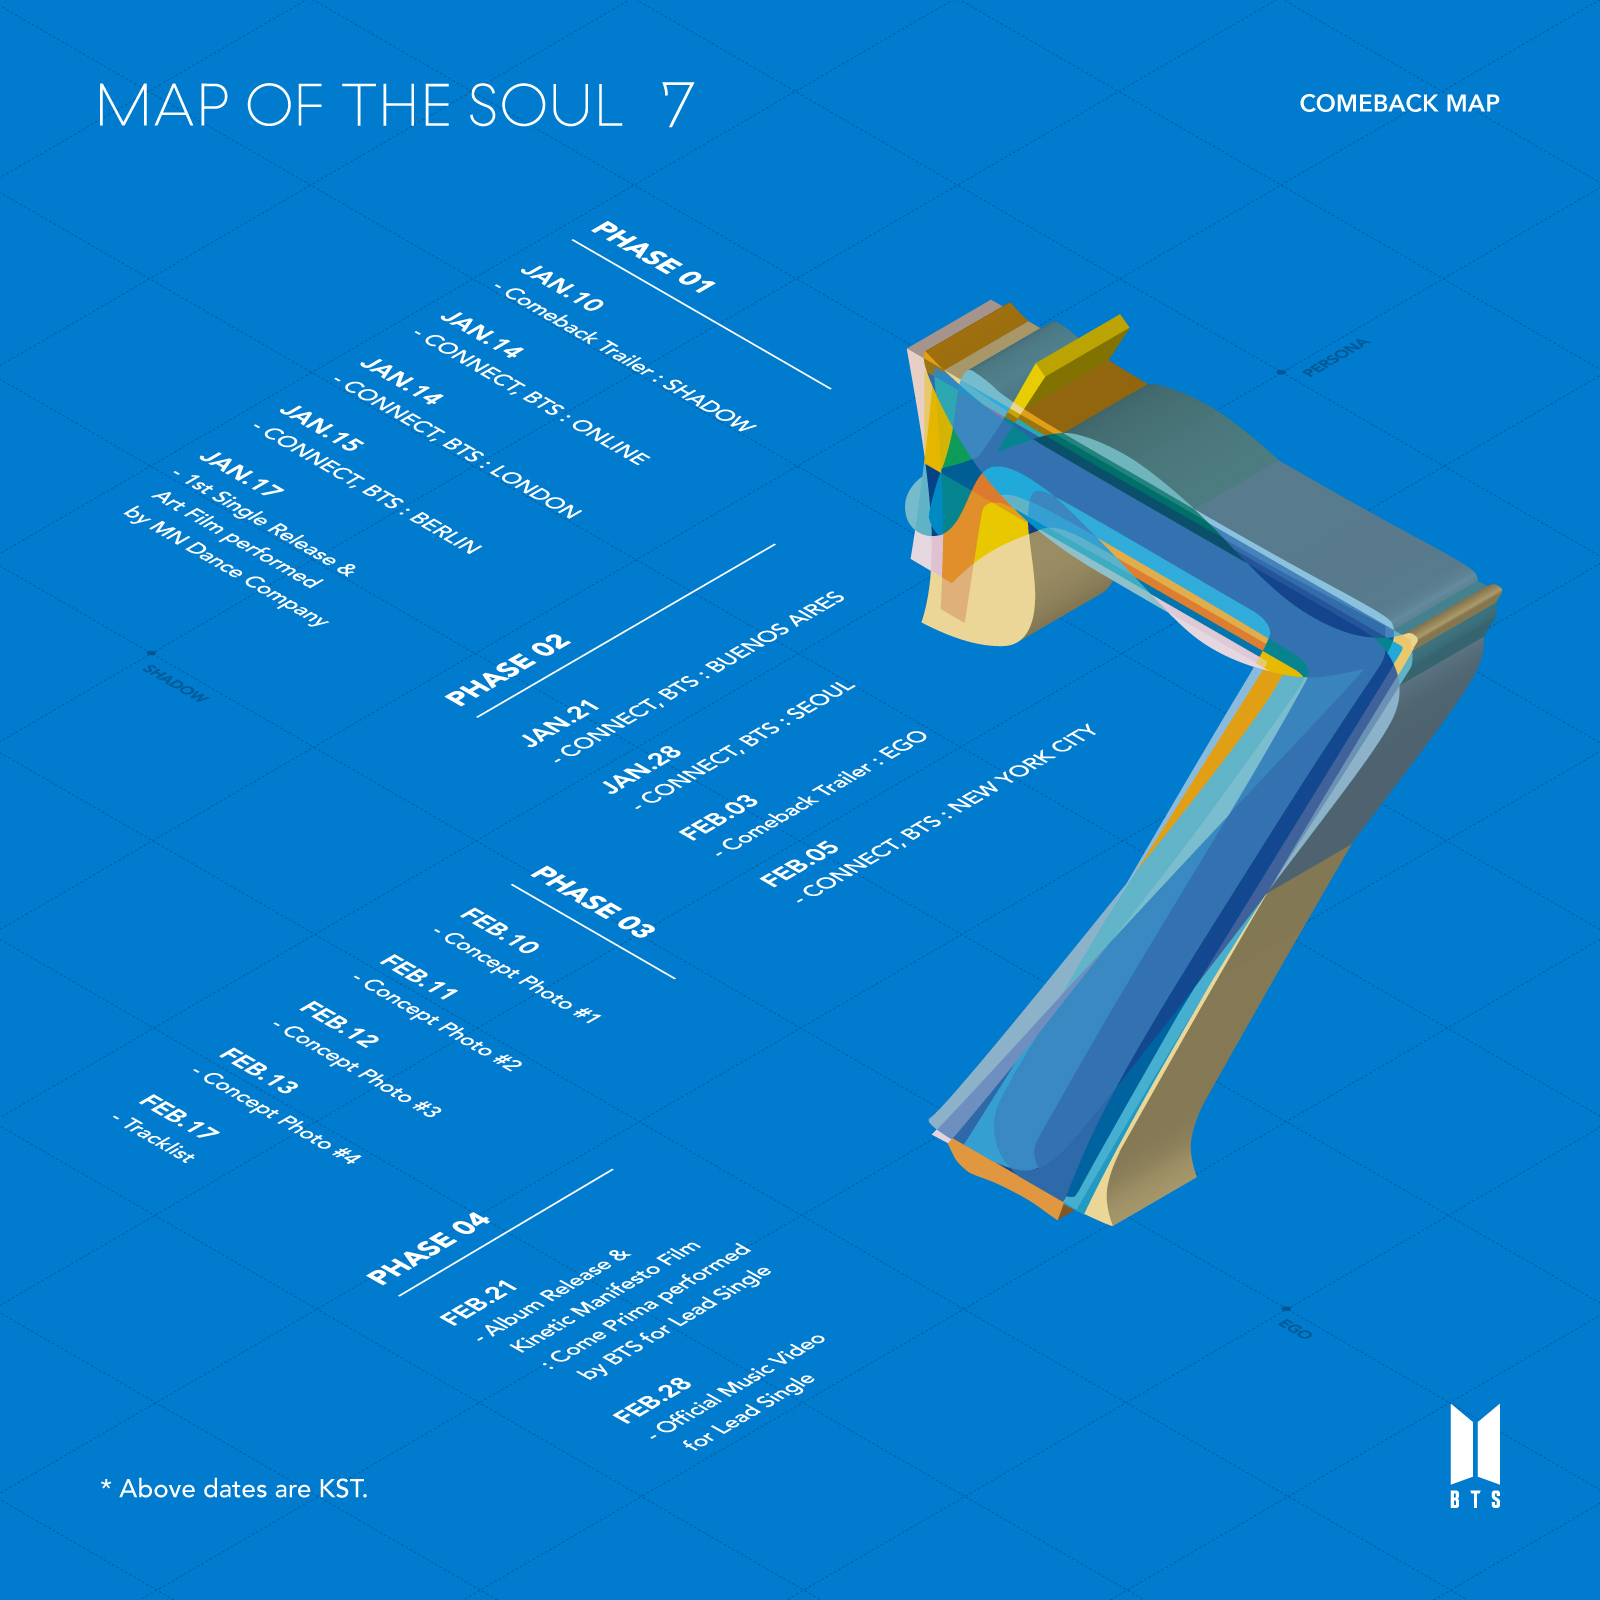 Bighit Entertainment Bts 방탄소년단 Map Of The Soul 7 Comeback Map Map Of The Soul 7